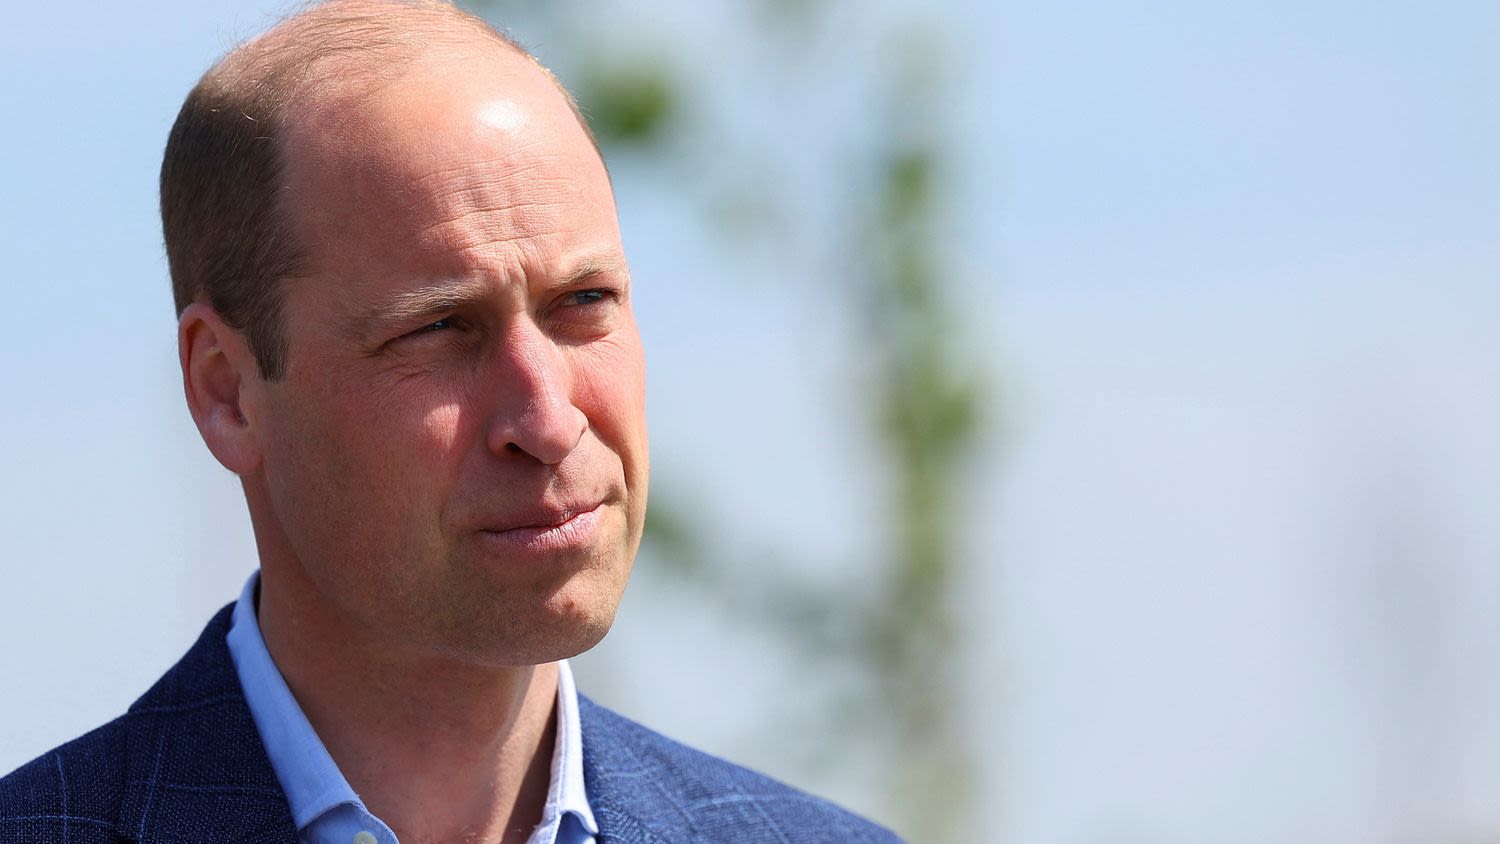 Prince William Is Reportedly "Digging Deep" Amid Kate and Charles's Cancer Diagnoses